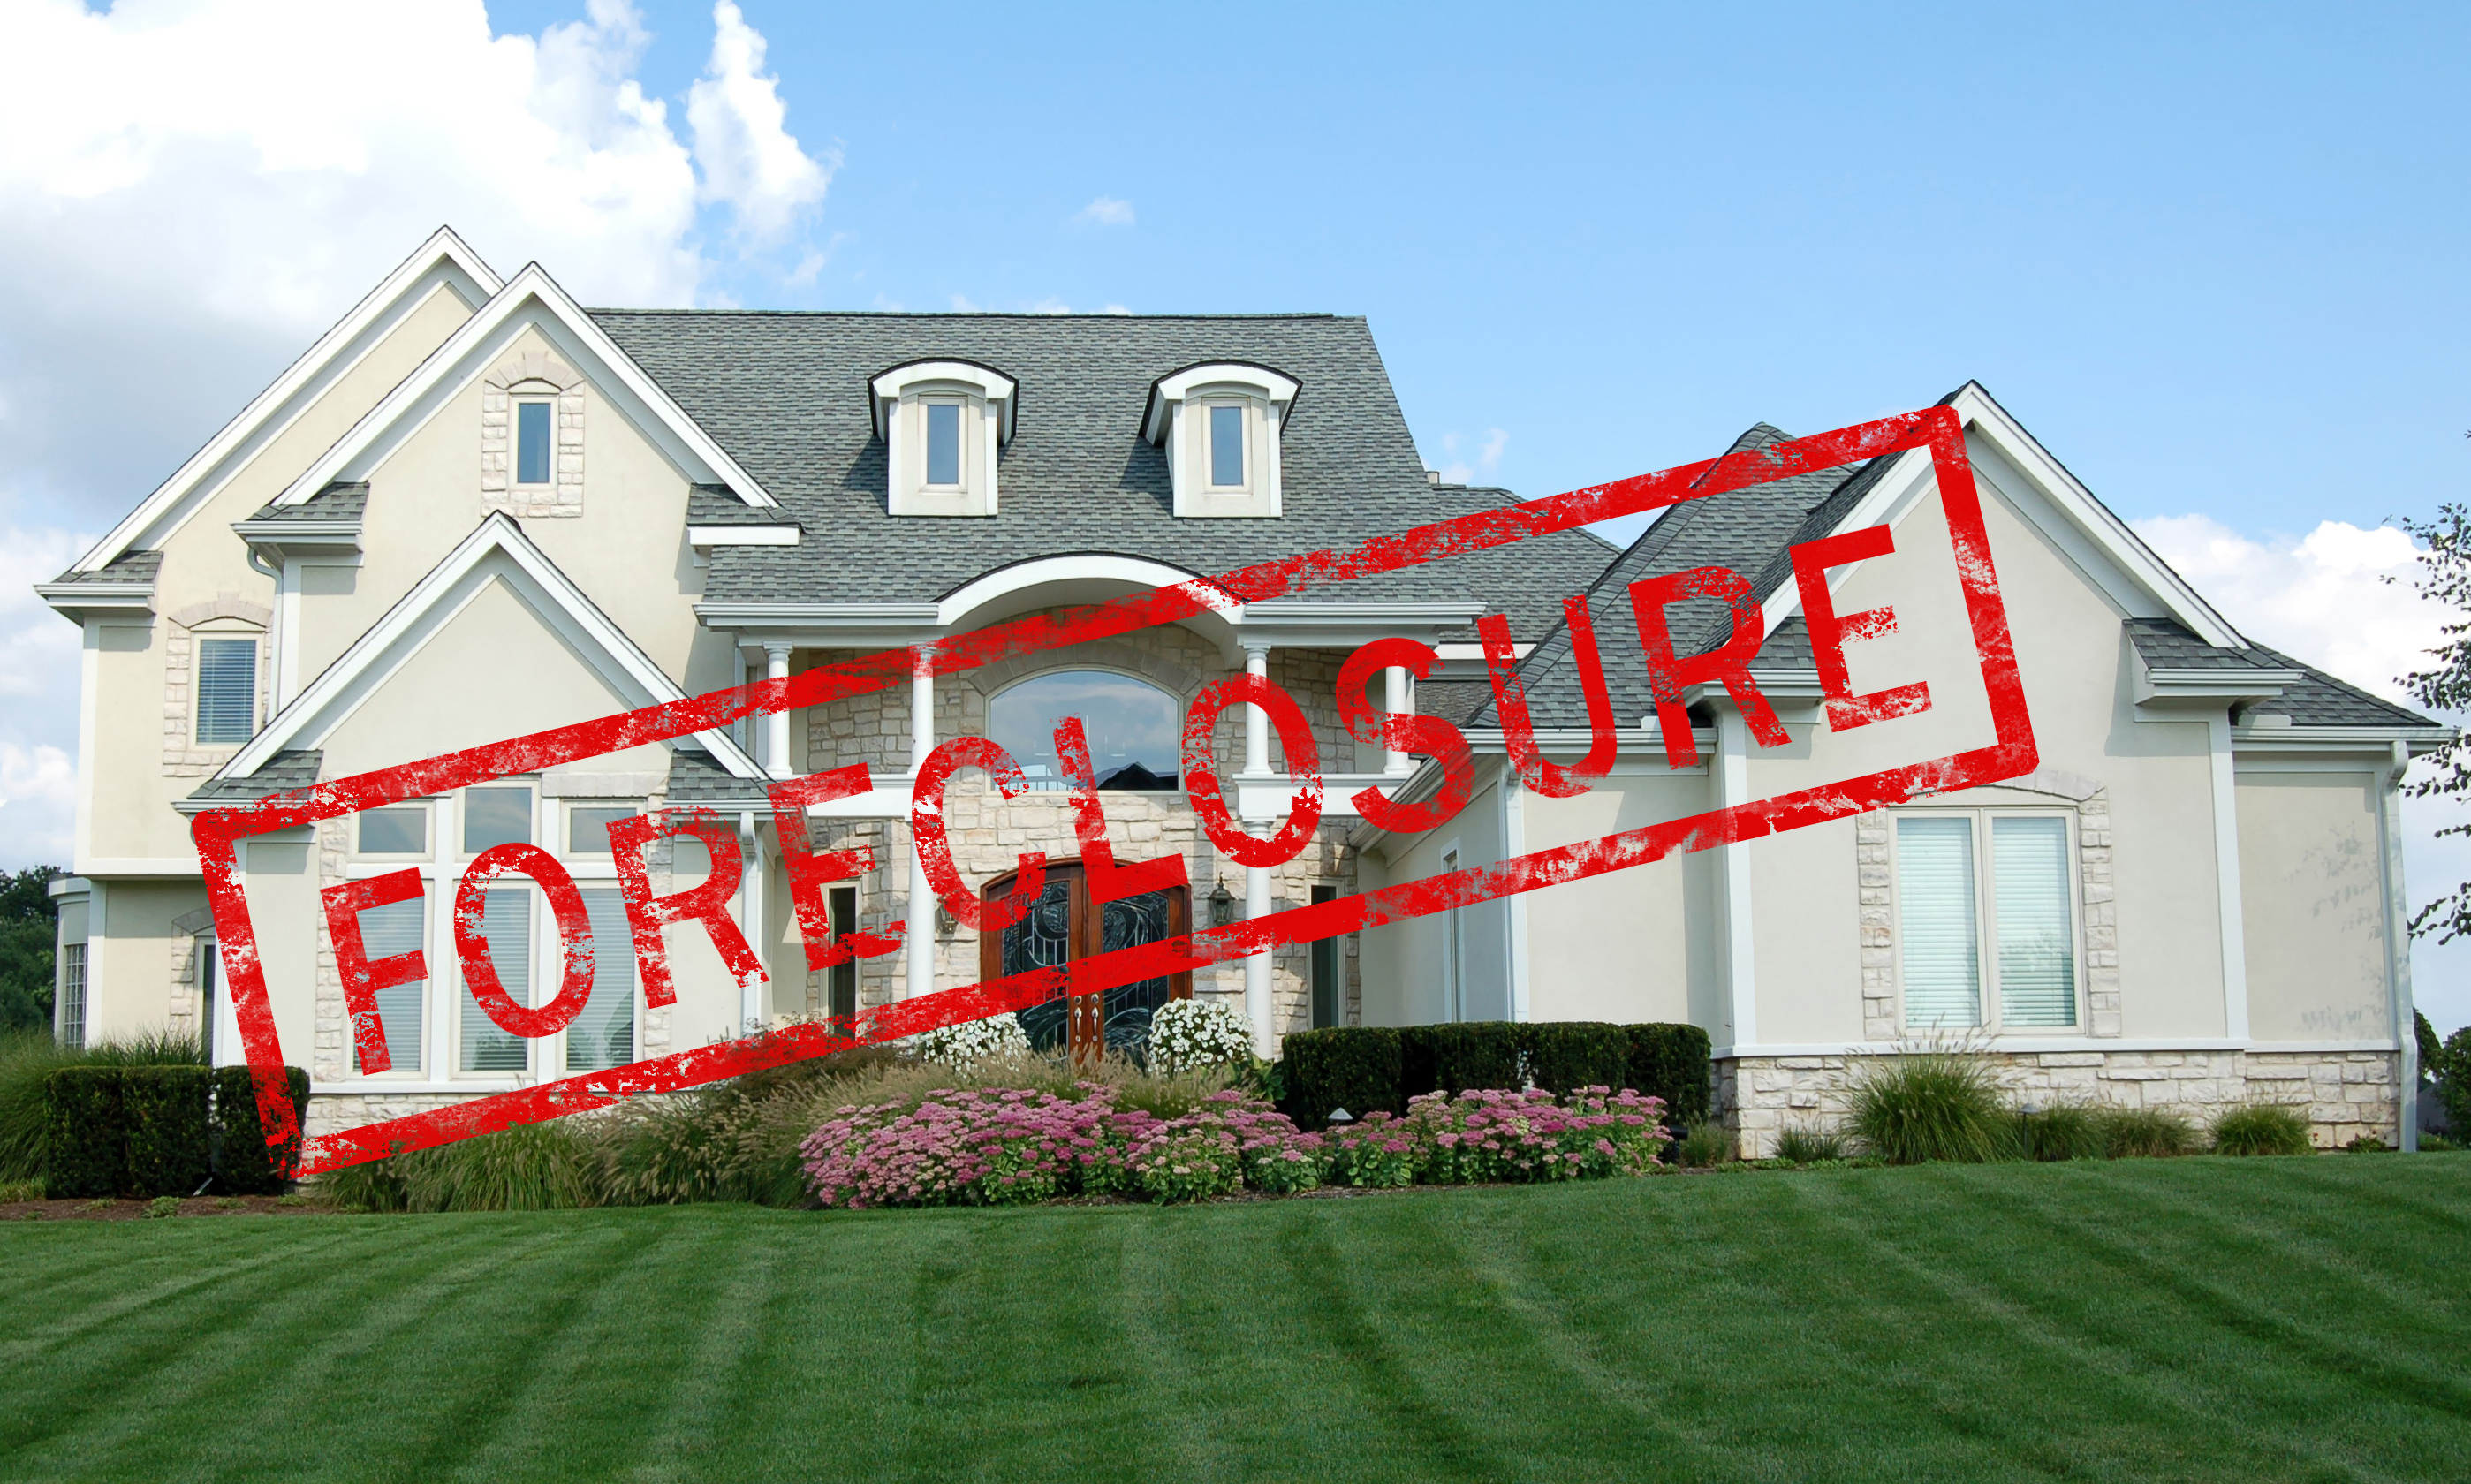 Call Appraisers of America, Inc. to discuss appraisals of Orange foreclosures